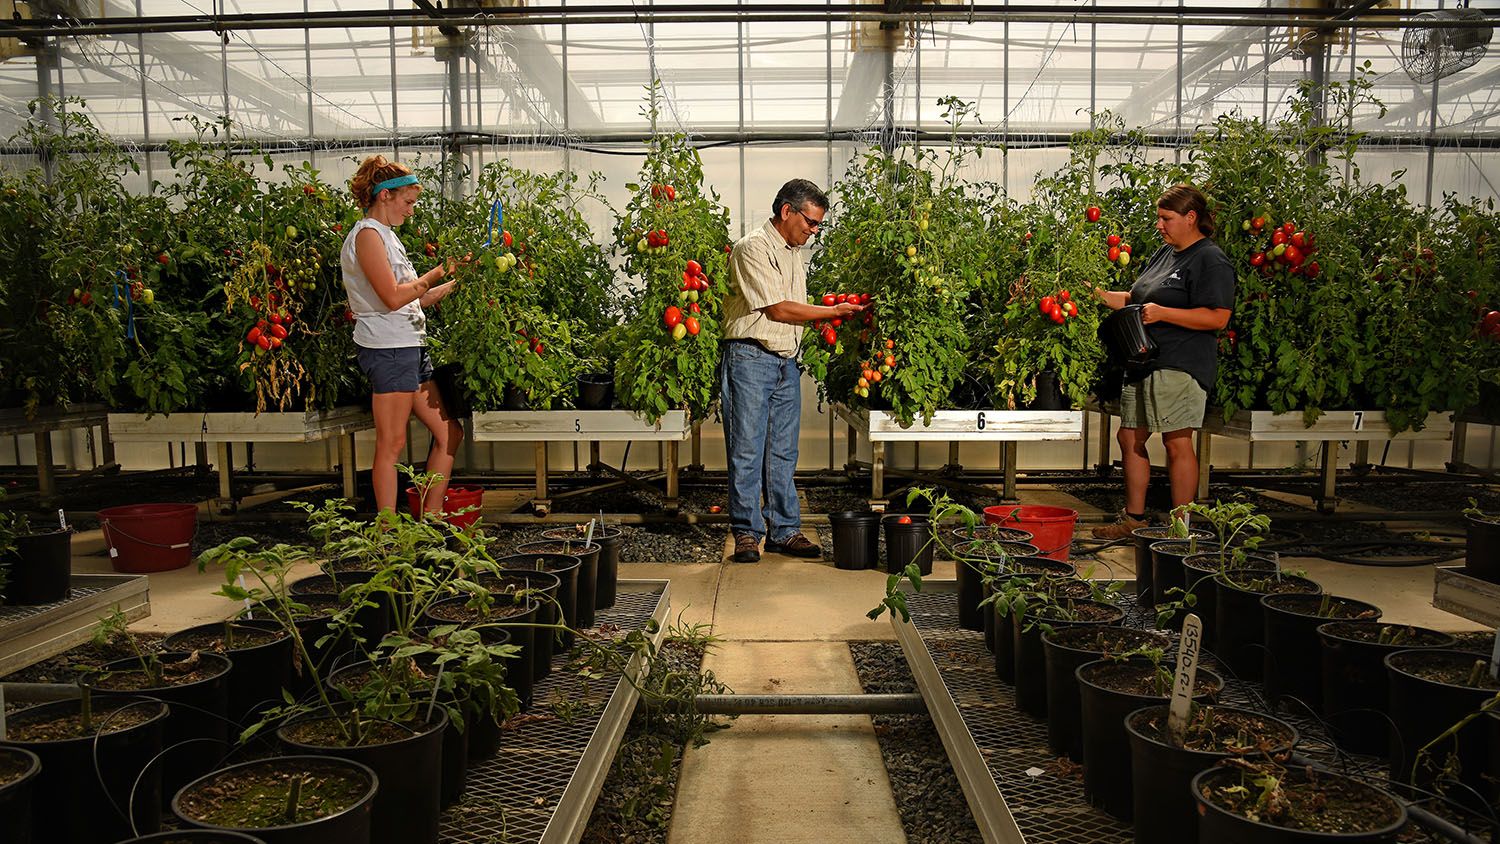 Dilip Panthee (center), researcher at Mountain Horticultural Research and Extension Center, looks over tomatoes in the farm's greenhouse as students tend to the plants.